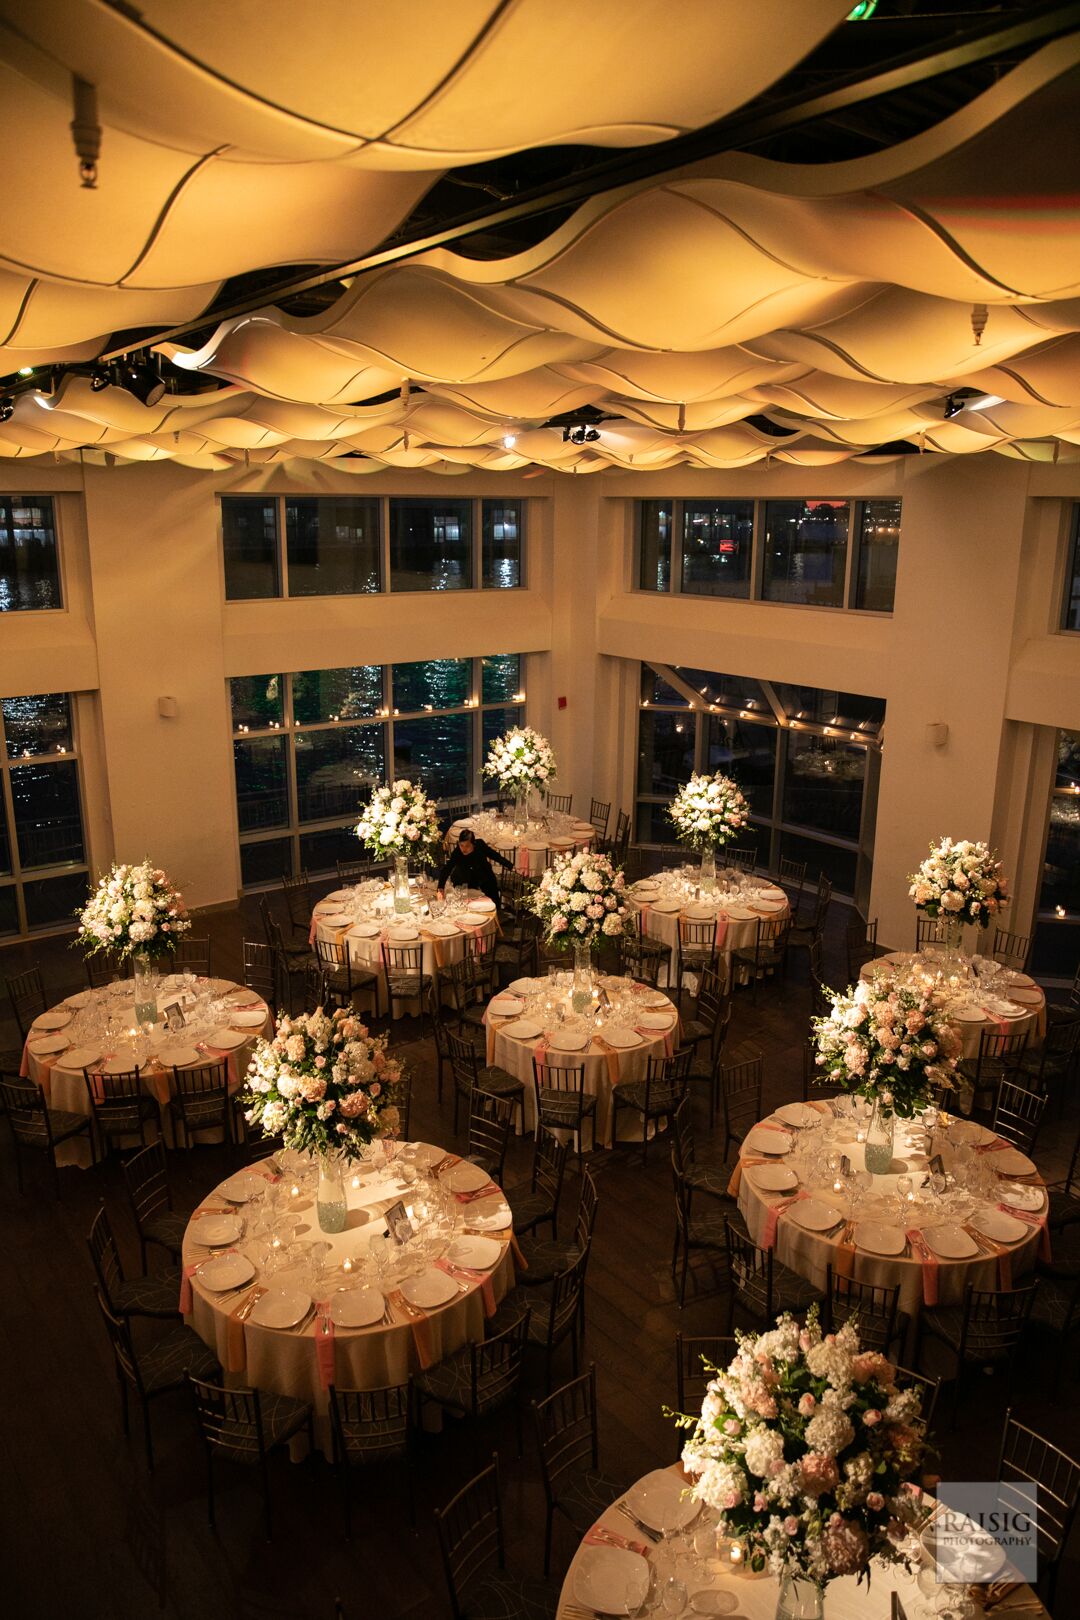 Current Pictures taken from above of the wedding ballroom set for dinner with amber lighting